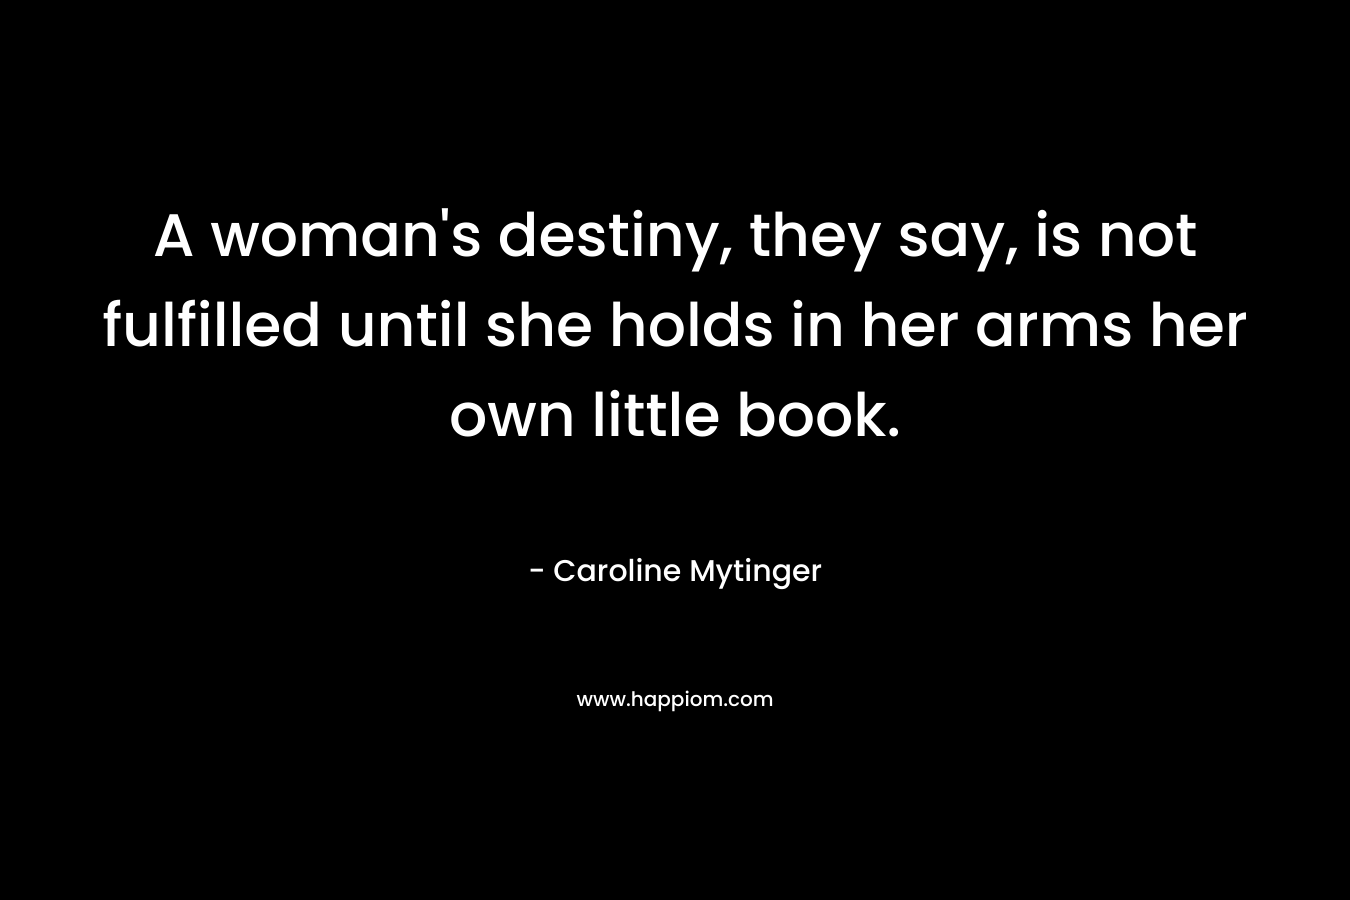 A woman's destiny, they say, is not fulfilled until she holds in her arms her own little book.